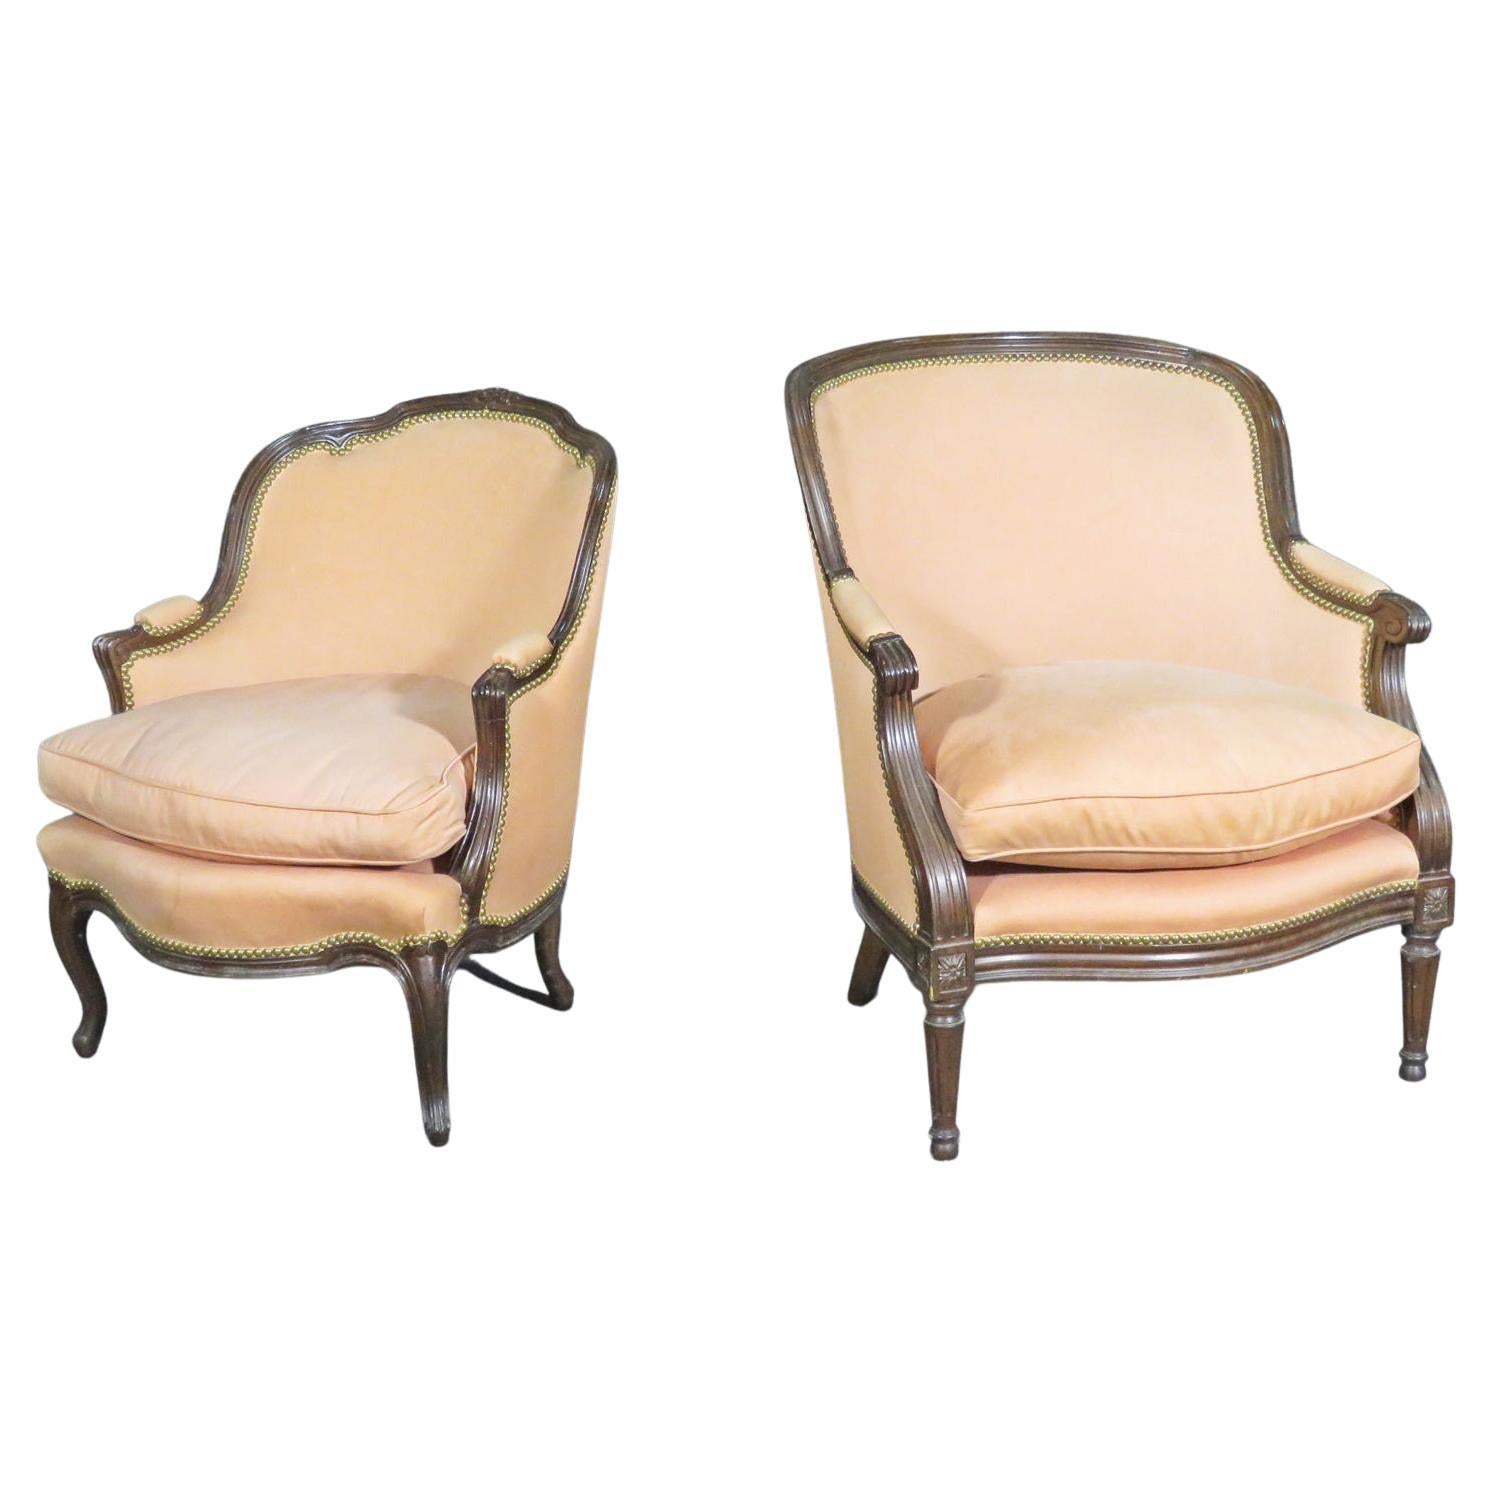 Mated Pair Similarly Upholstered French Carved Walnut Louis Bergere Chairs For Sale